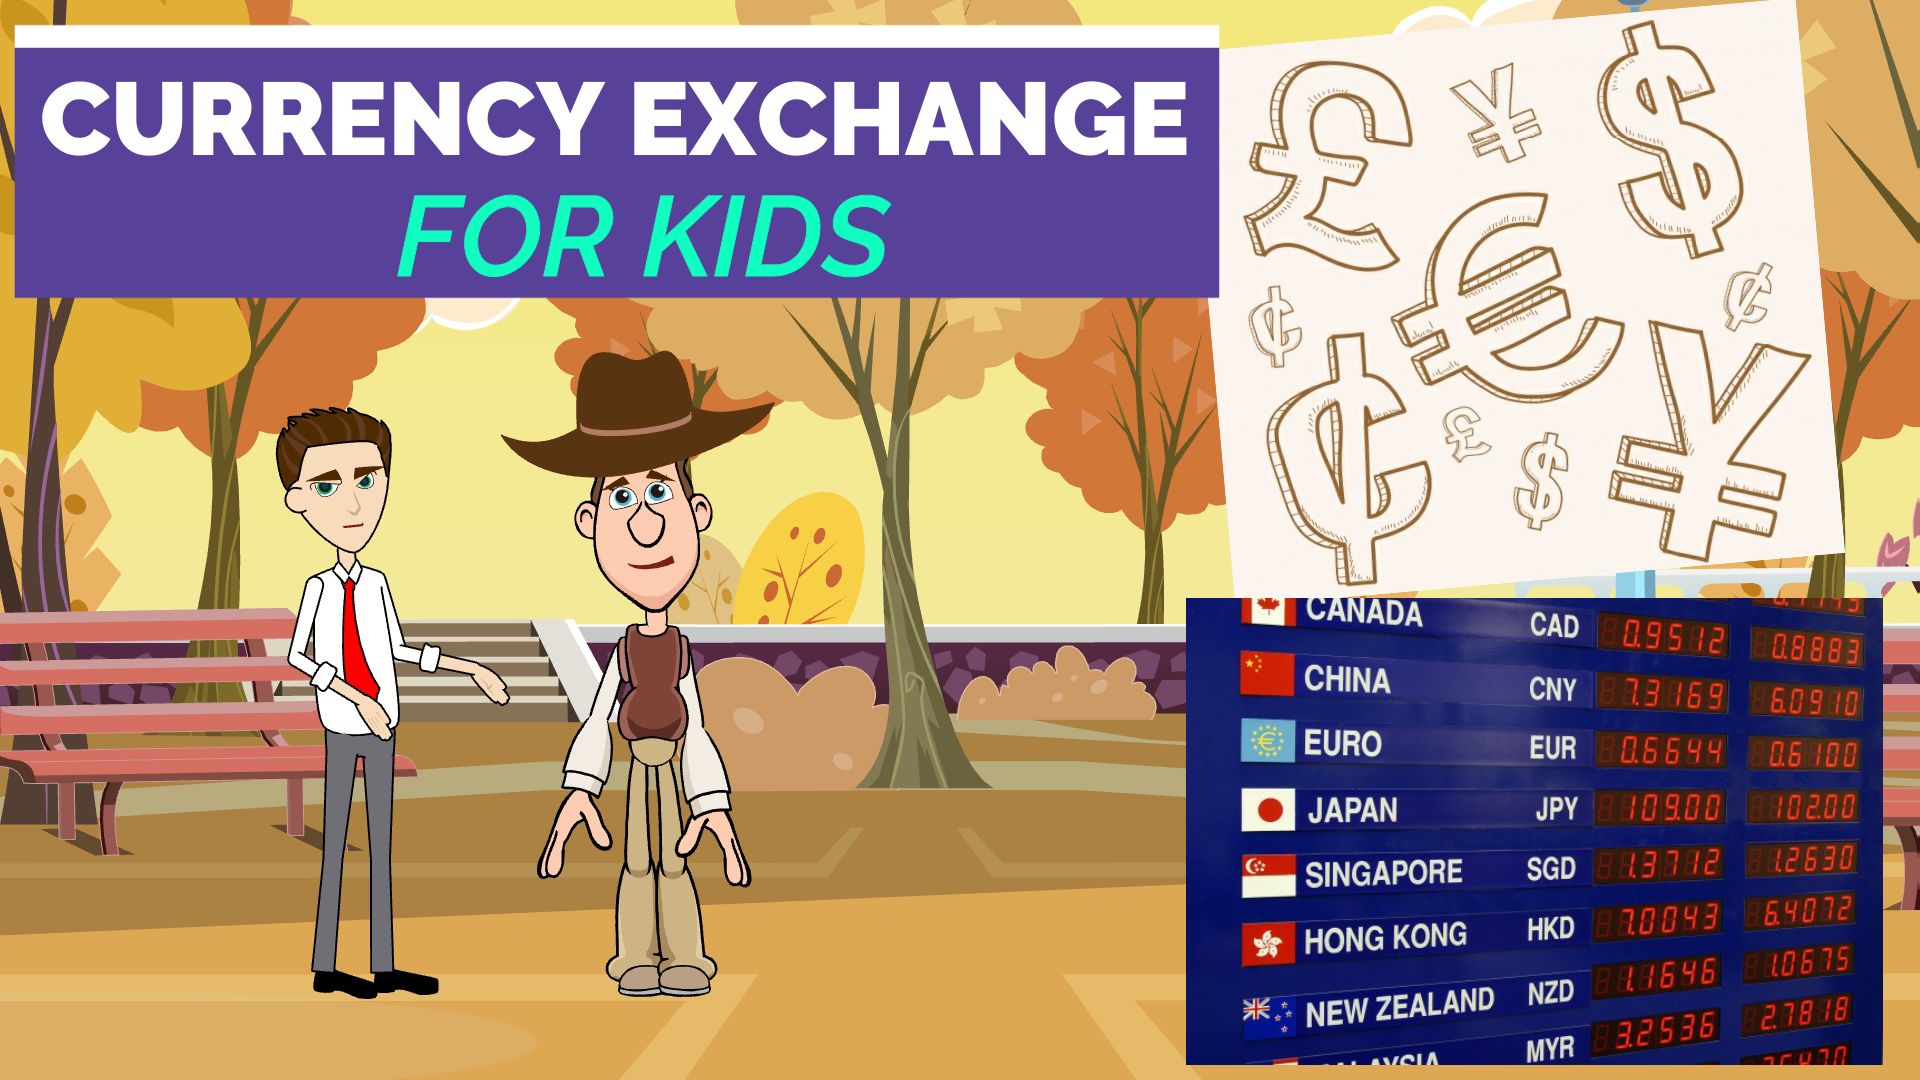 What is a currency exchange